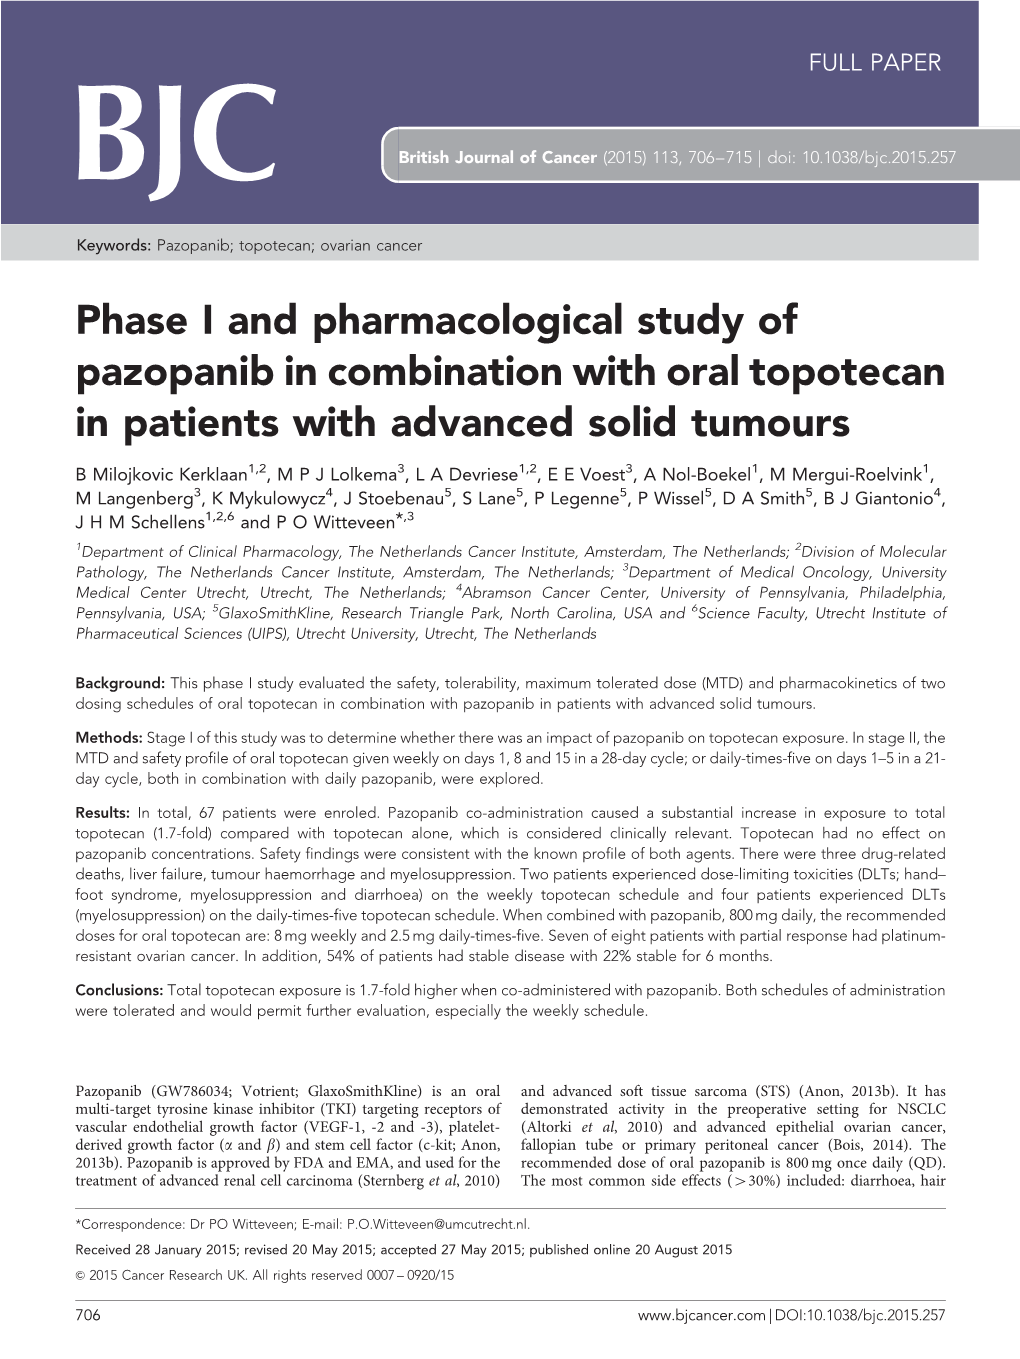 Phase I and Pharmacological Study of Pazopanib in Combination with Oral Topotecan in Patients with Advanced Solid Tumours